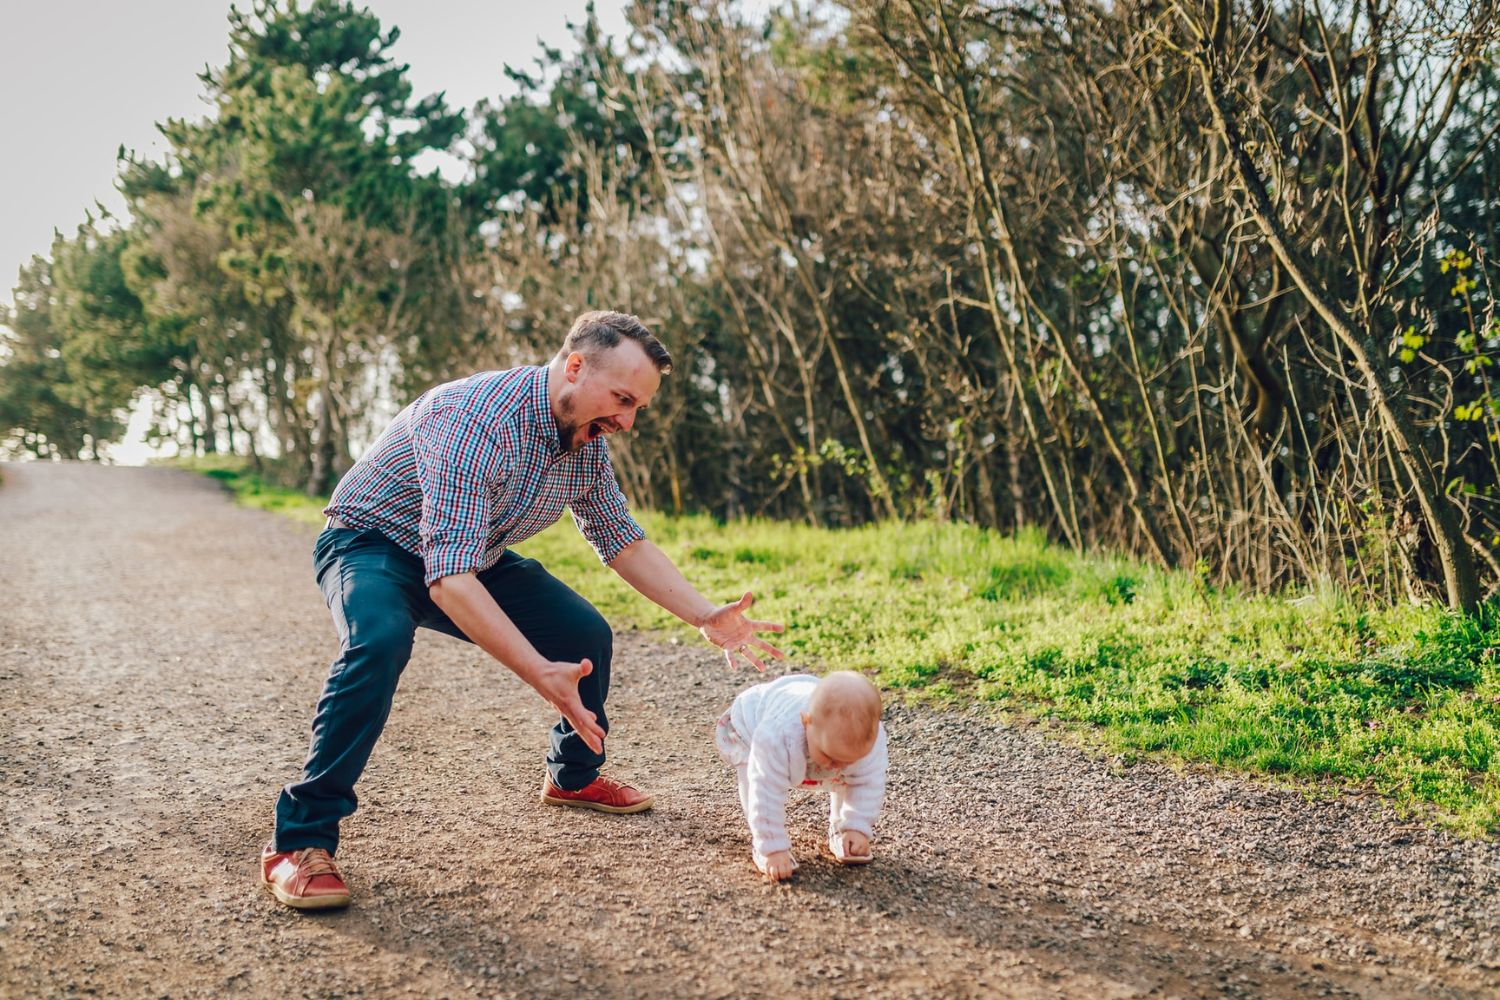 dad-and-babay lifestyle Photo by Peter Dlhy on Unsplash